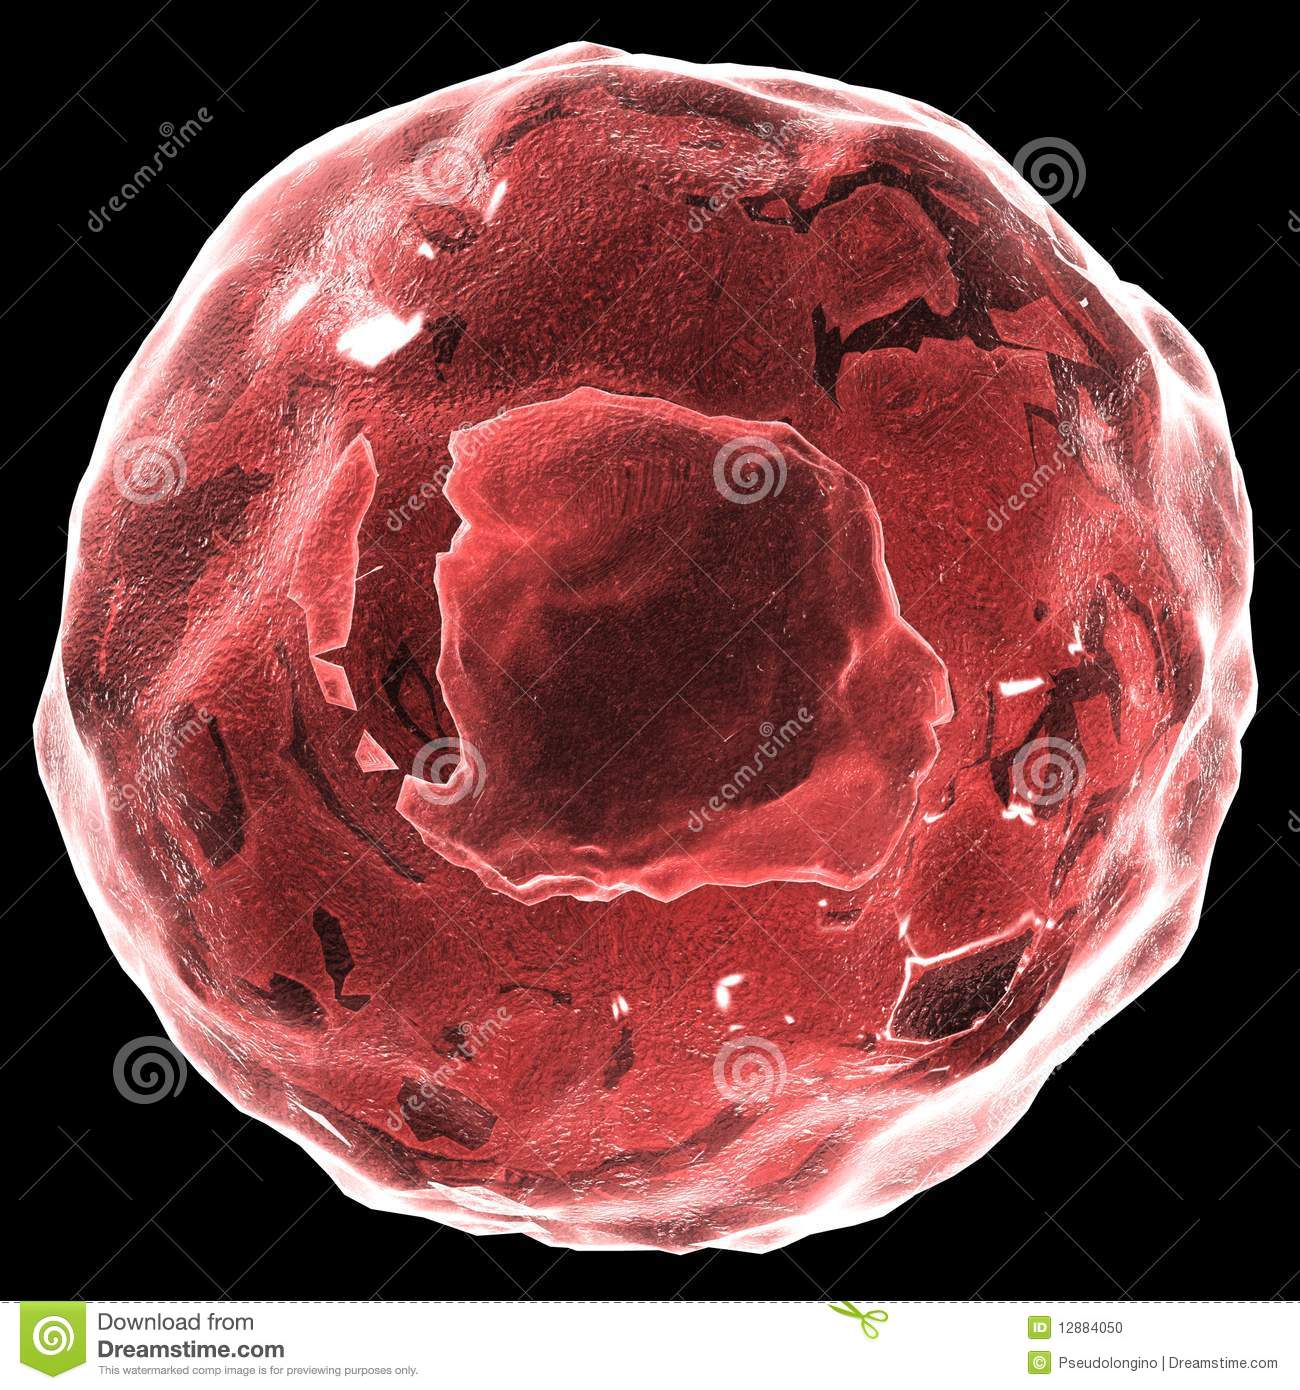 Skin Cell Stock Photo   Image  12884050